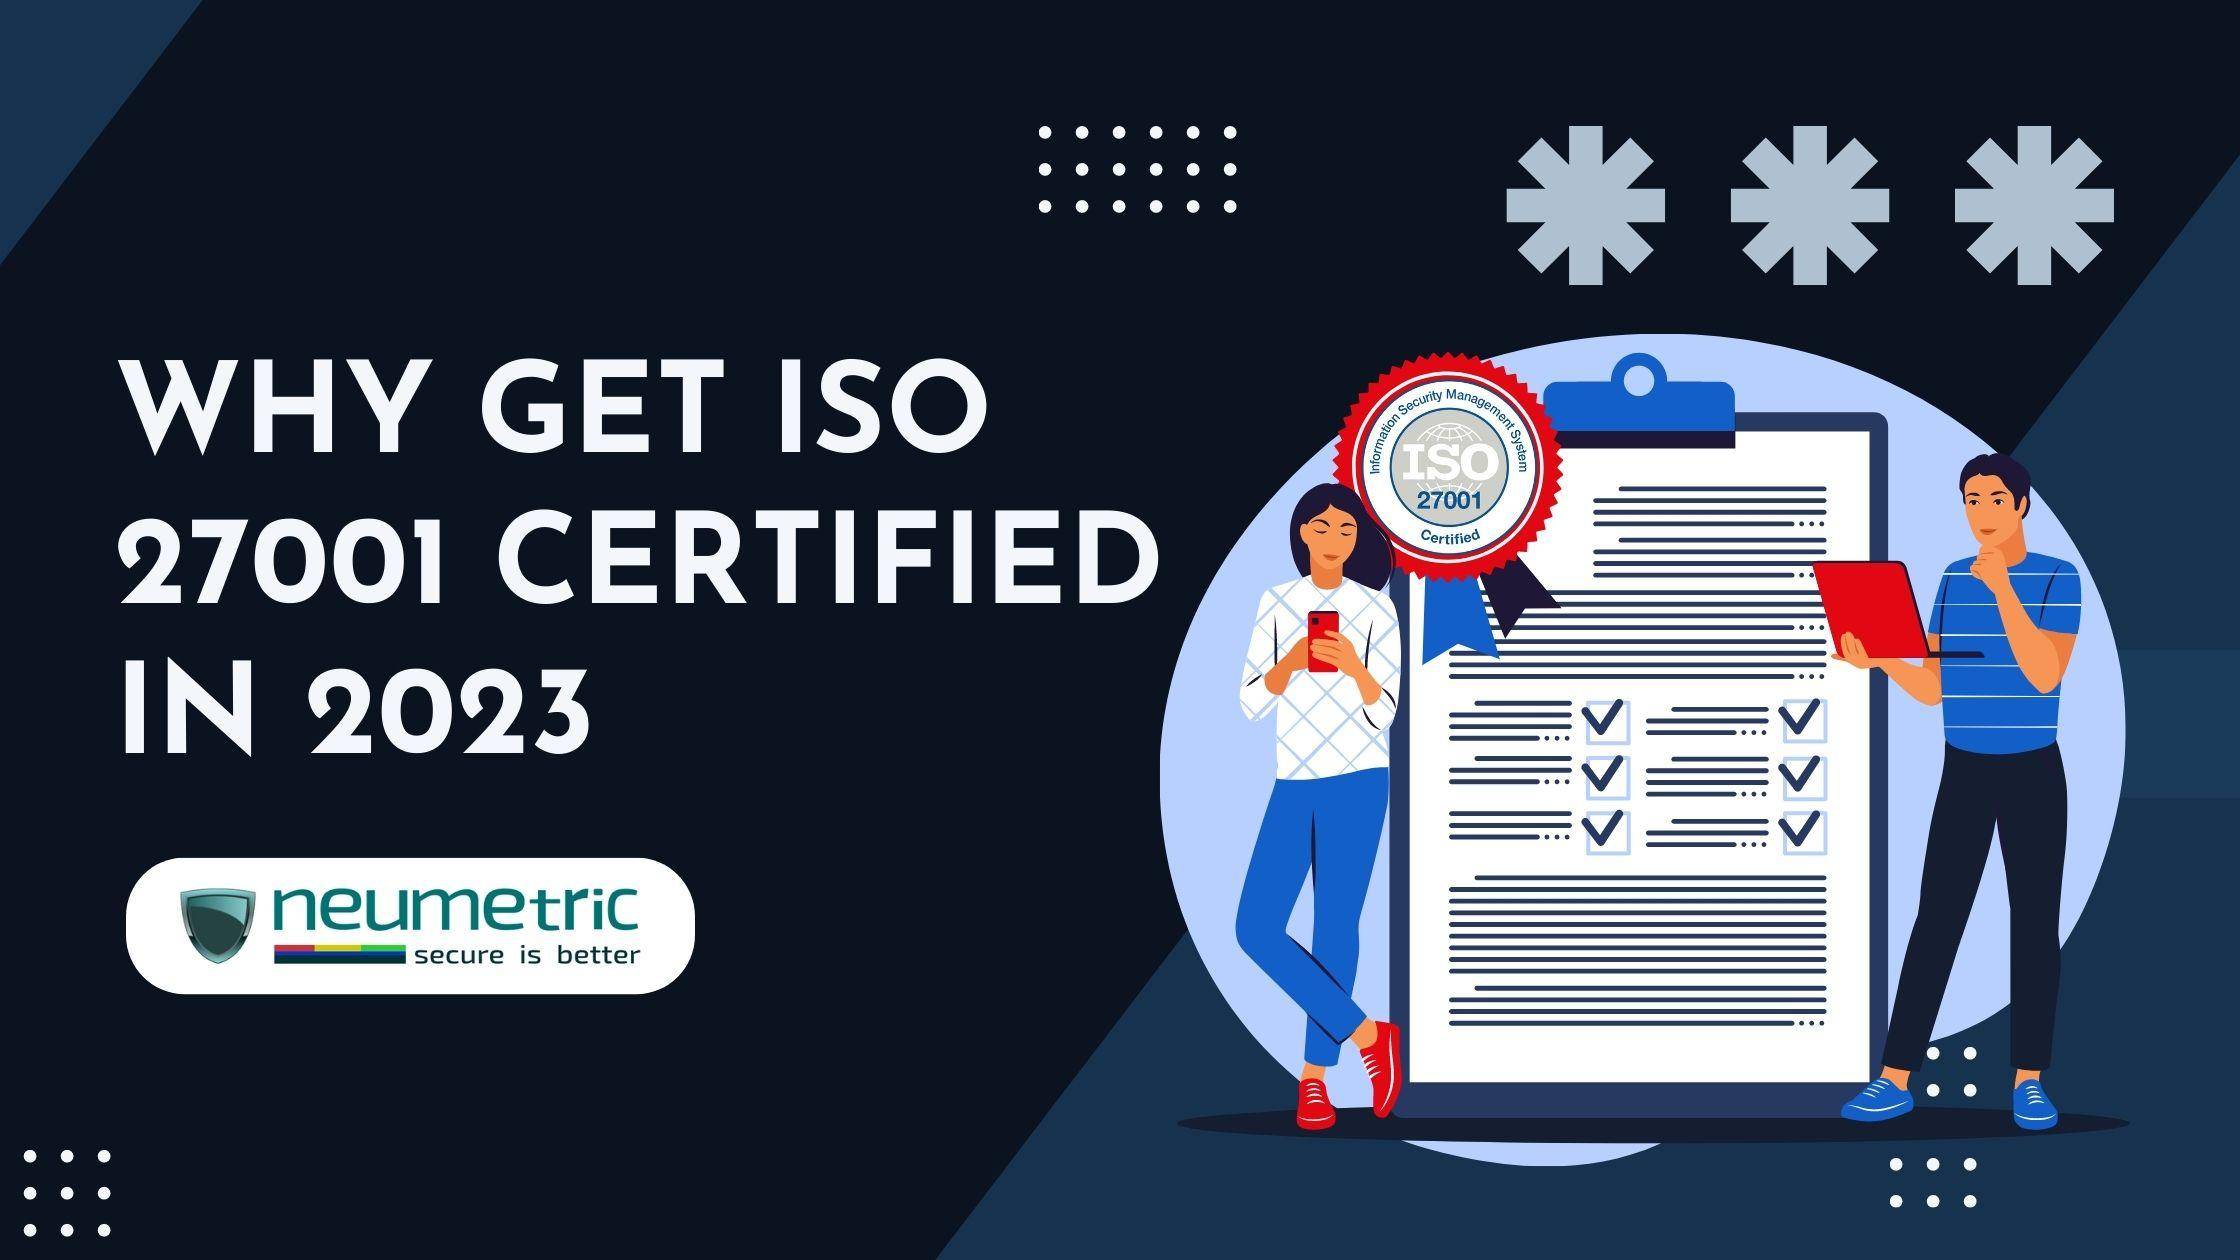 Why get ISO 27001 Certified in 2023